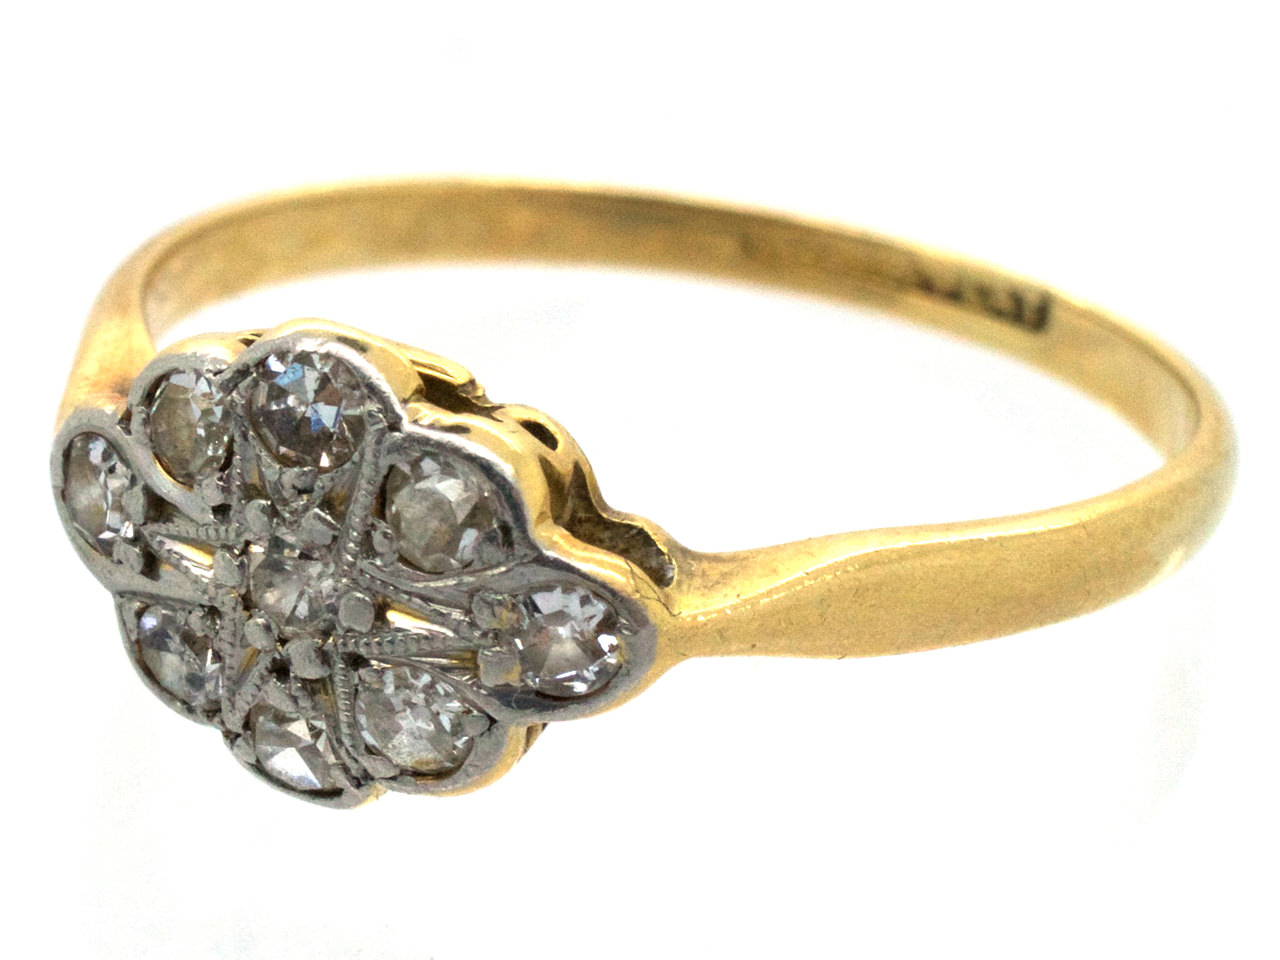 Edwardian Diamond Cluster Ring (592G) | The Antique Jewellery Company